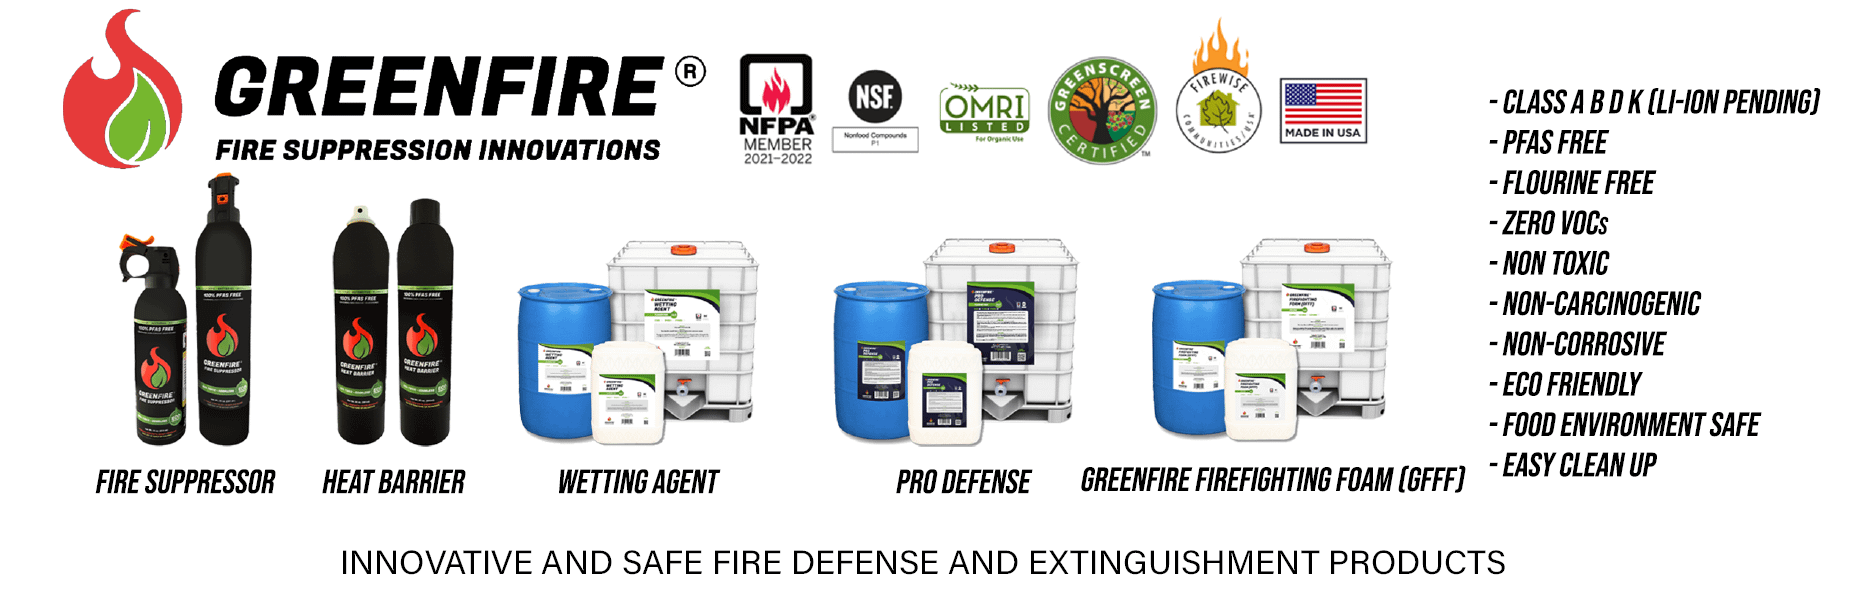 NACH Marketing - Greenfire Fire Suppression Innovations - Innovative and Safe Fire Defense and Extinguishment Products